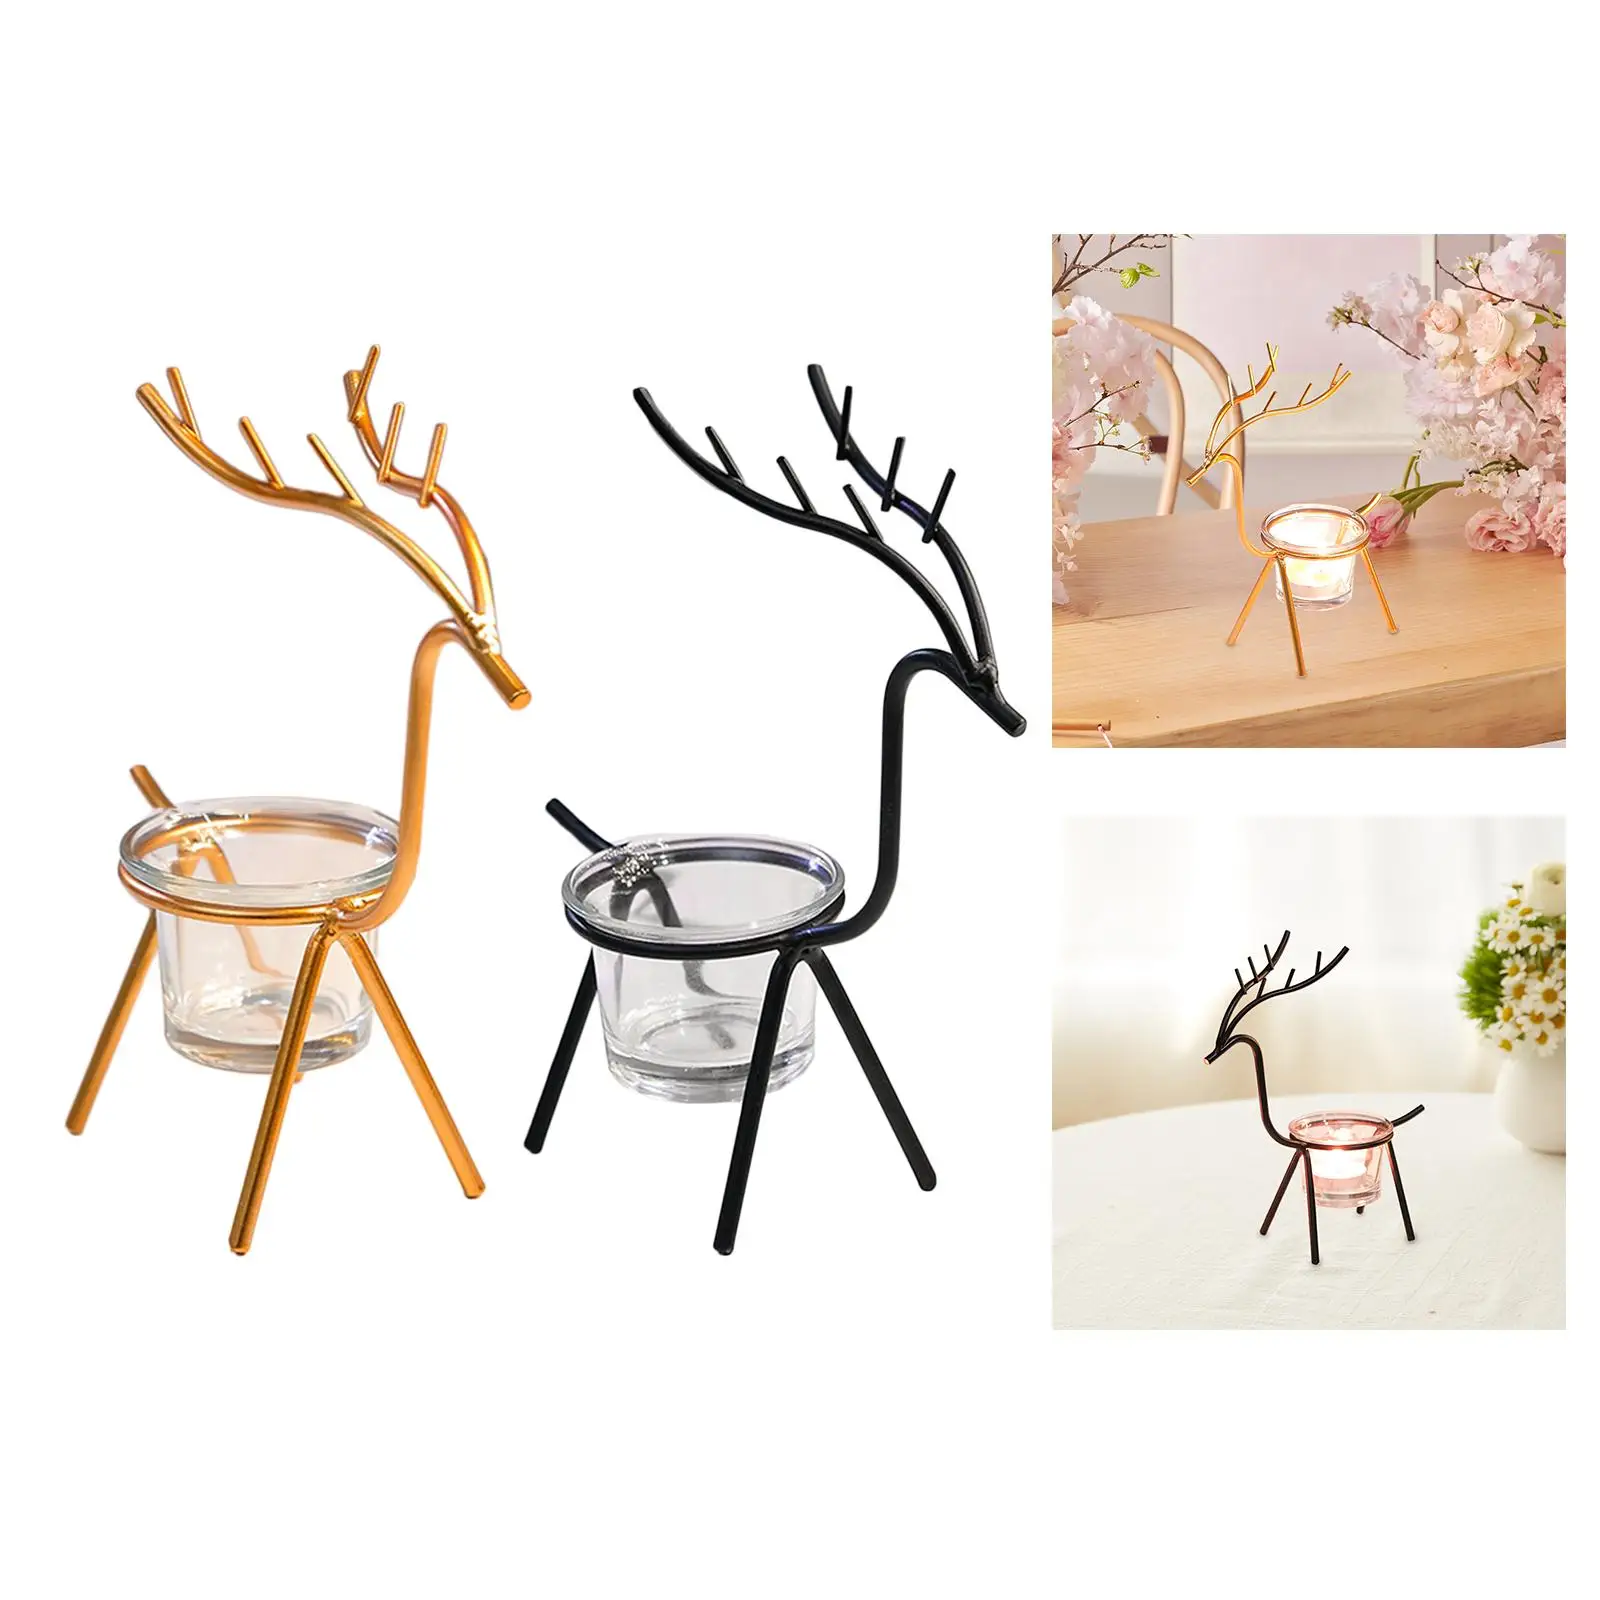 Metal Reindeer Tea Light Candle Holder Pillar Candle Holder Valentines Day Gifts for Dining Table Home Bedroom Garden Outdoor